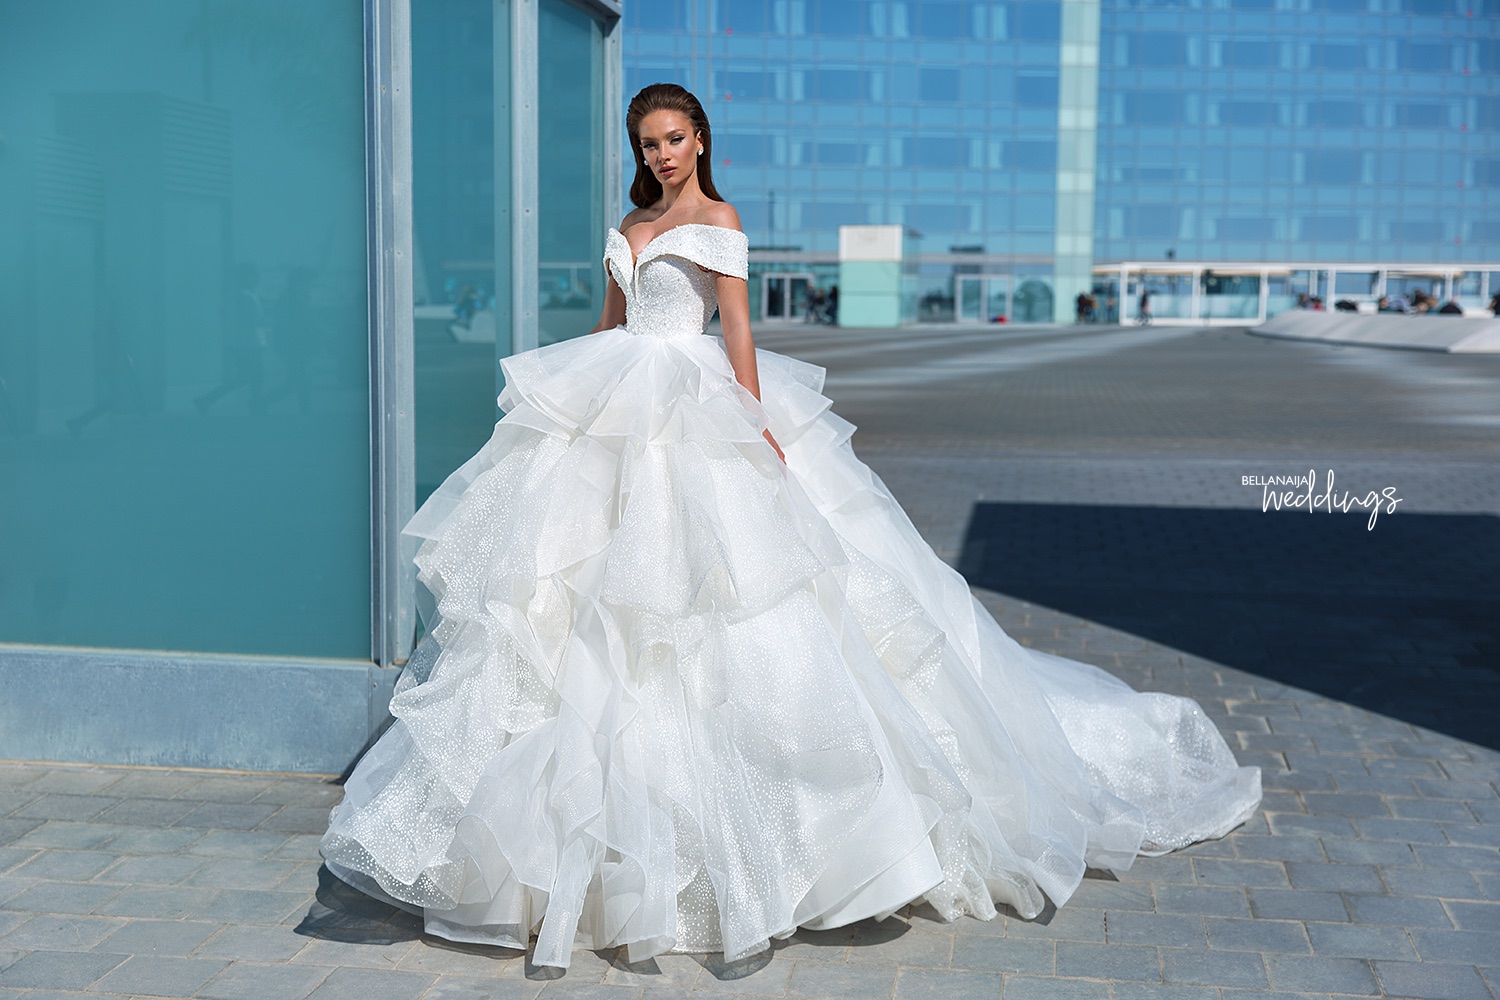 BN Bridal Collection: The Diva Collection by WONÁ